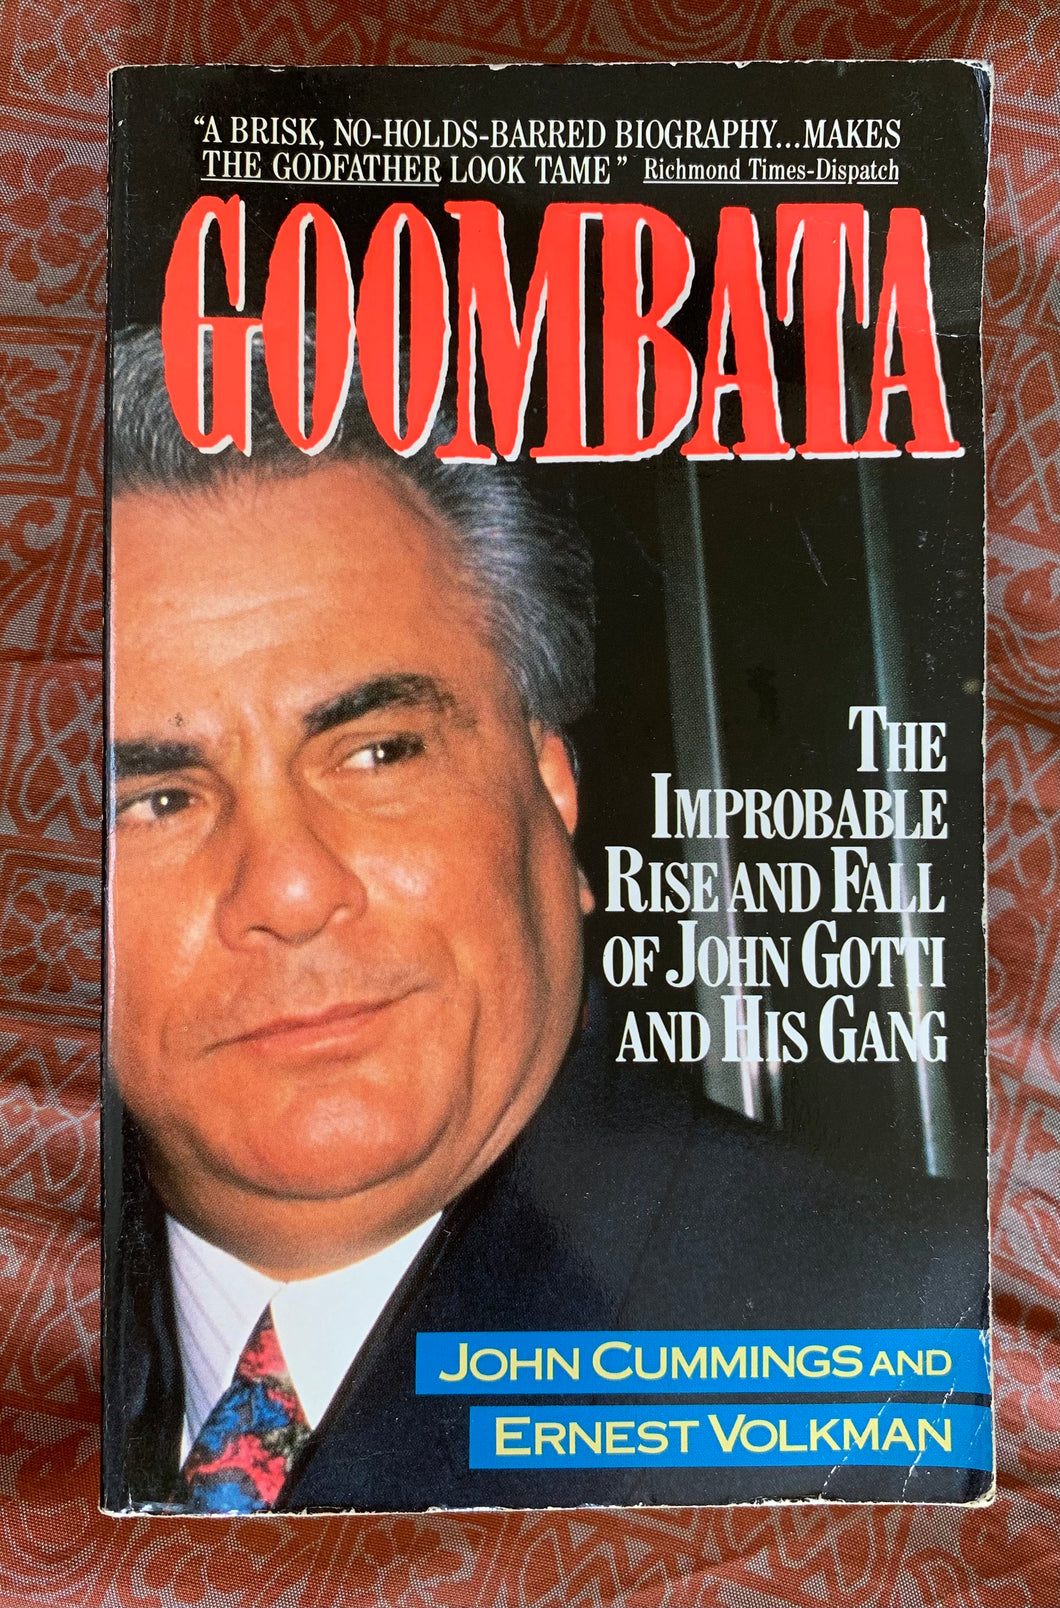 Goombata: The Improbable Rise and Fall of John Gotti and His Gang